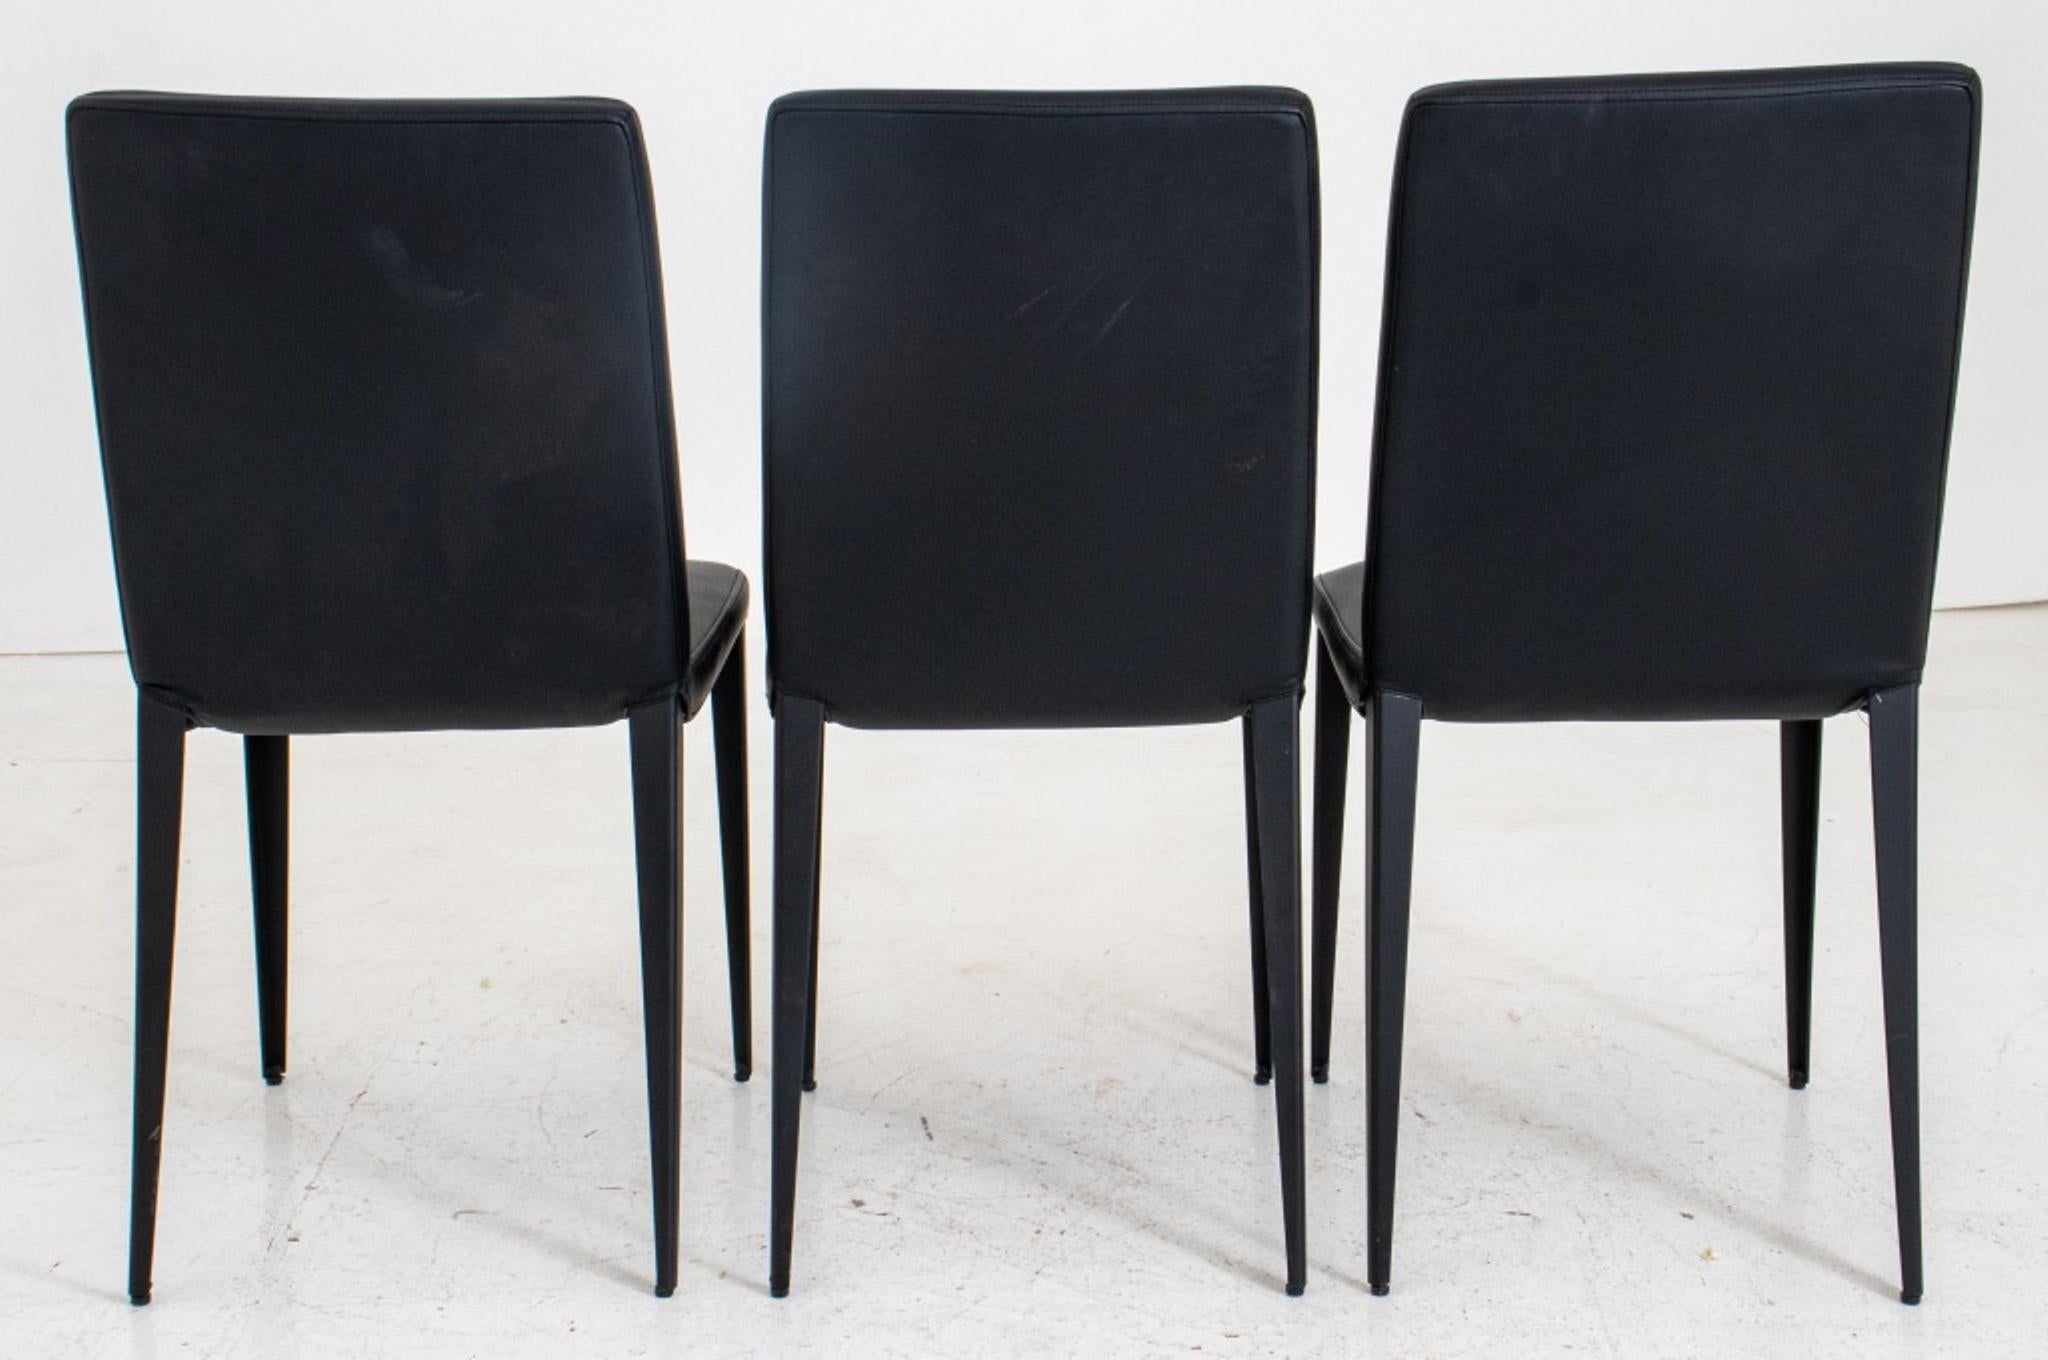 Italian Modern Style Black Dining/Side chairs, 3 In Good Condition For Sale In New York, NY